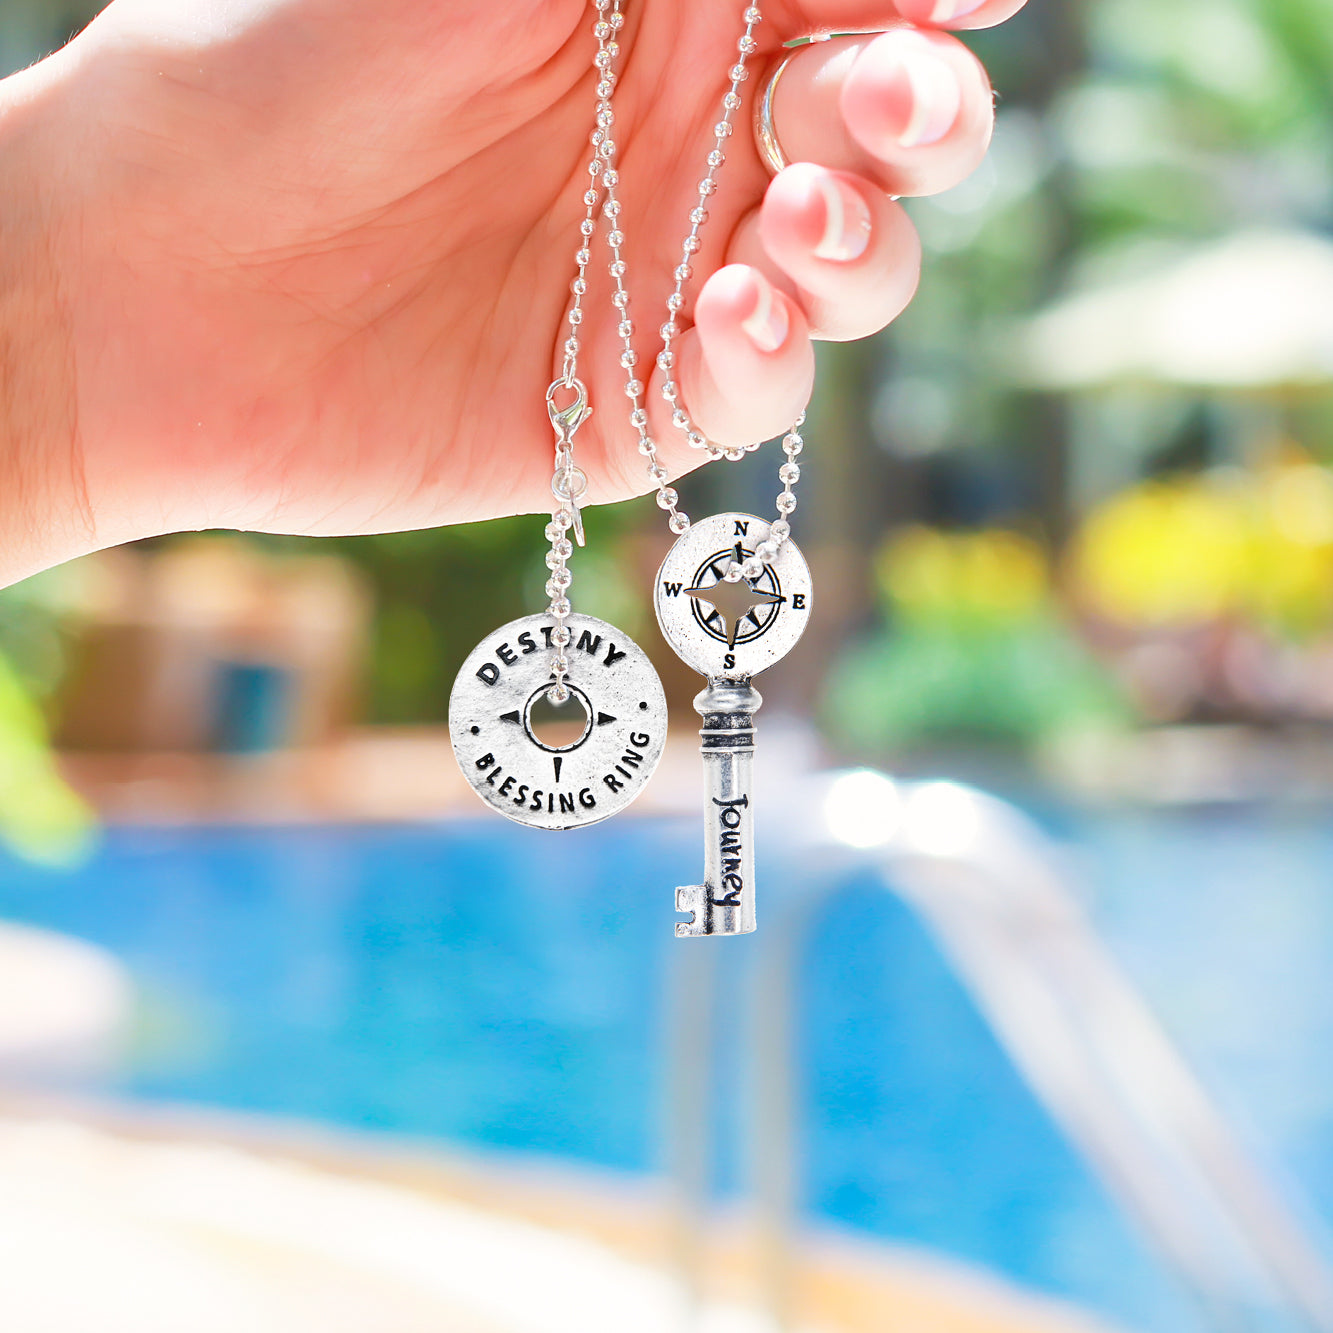 Hand holding Journey Key Charm on ball chain